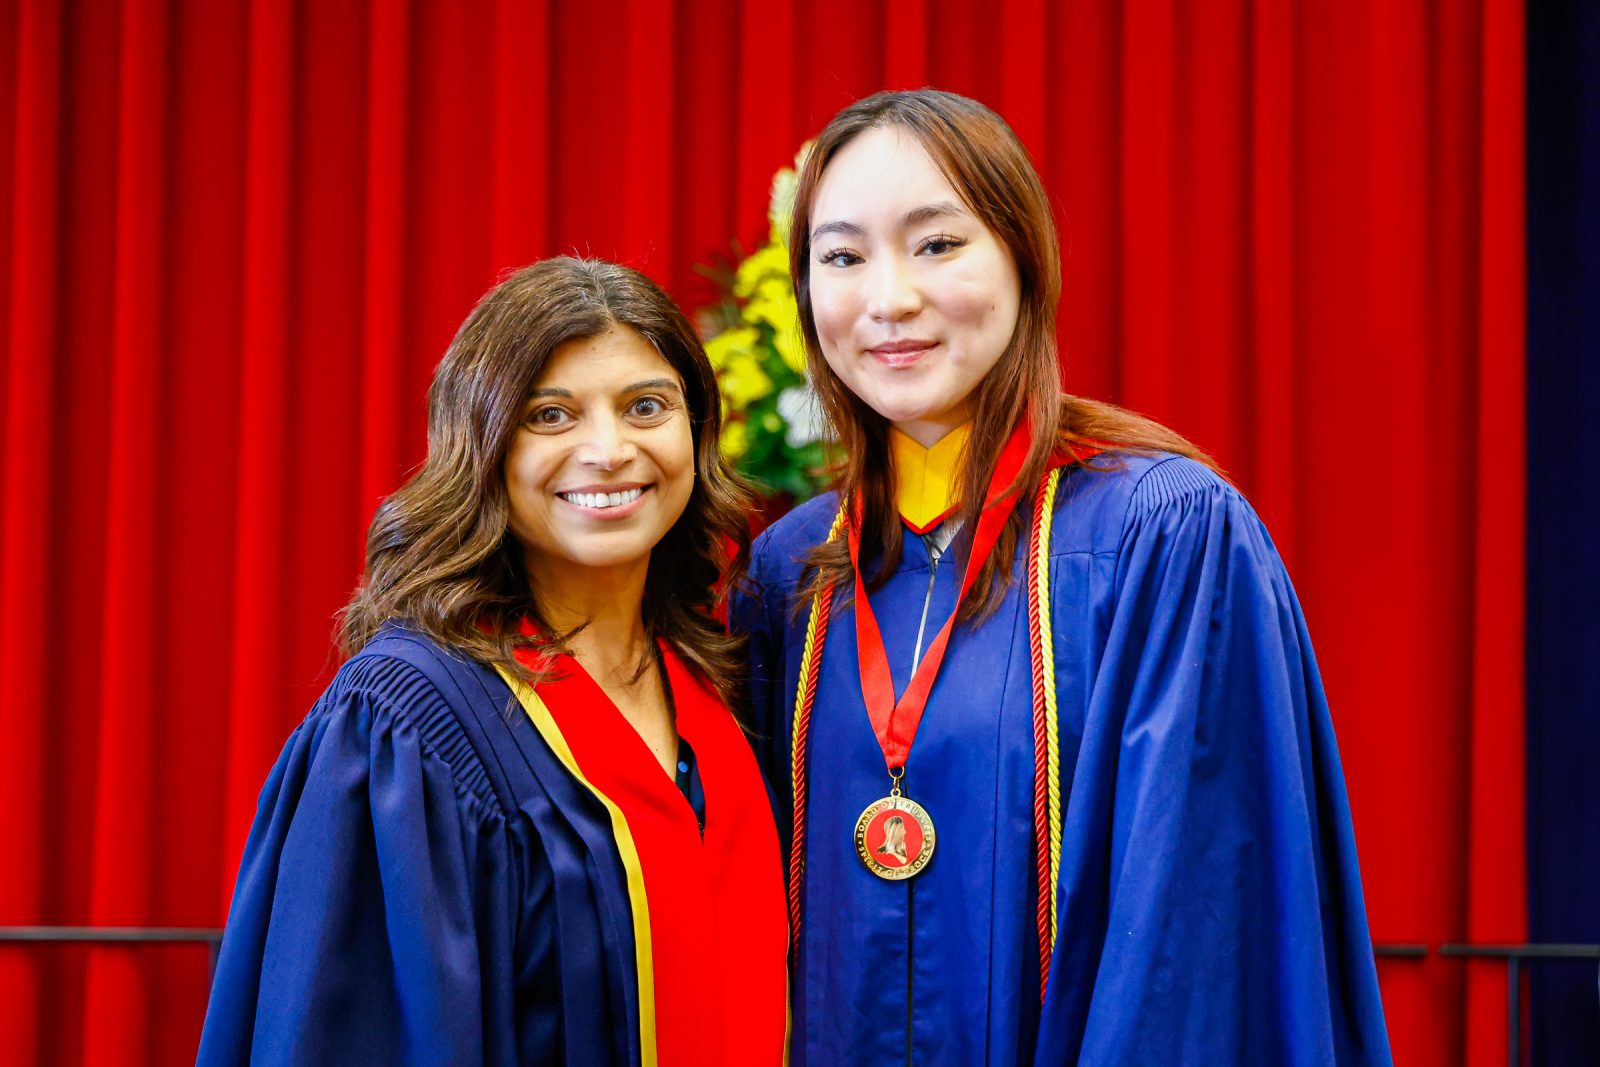 Arti Freeman (left) presents Silvana Nguyen with a Spirit of Brock medal on stage during Brock University’s Convocation ceremony. They are each wearing academic regalia.